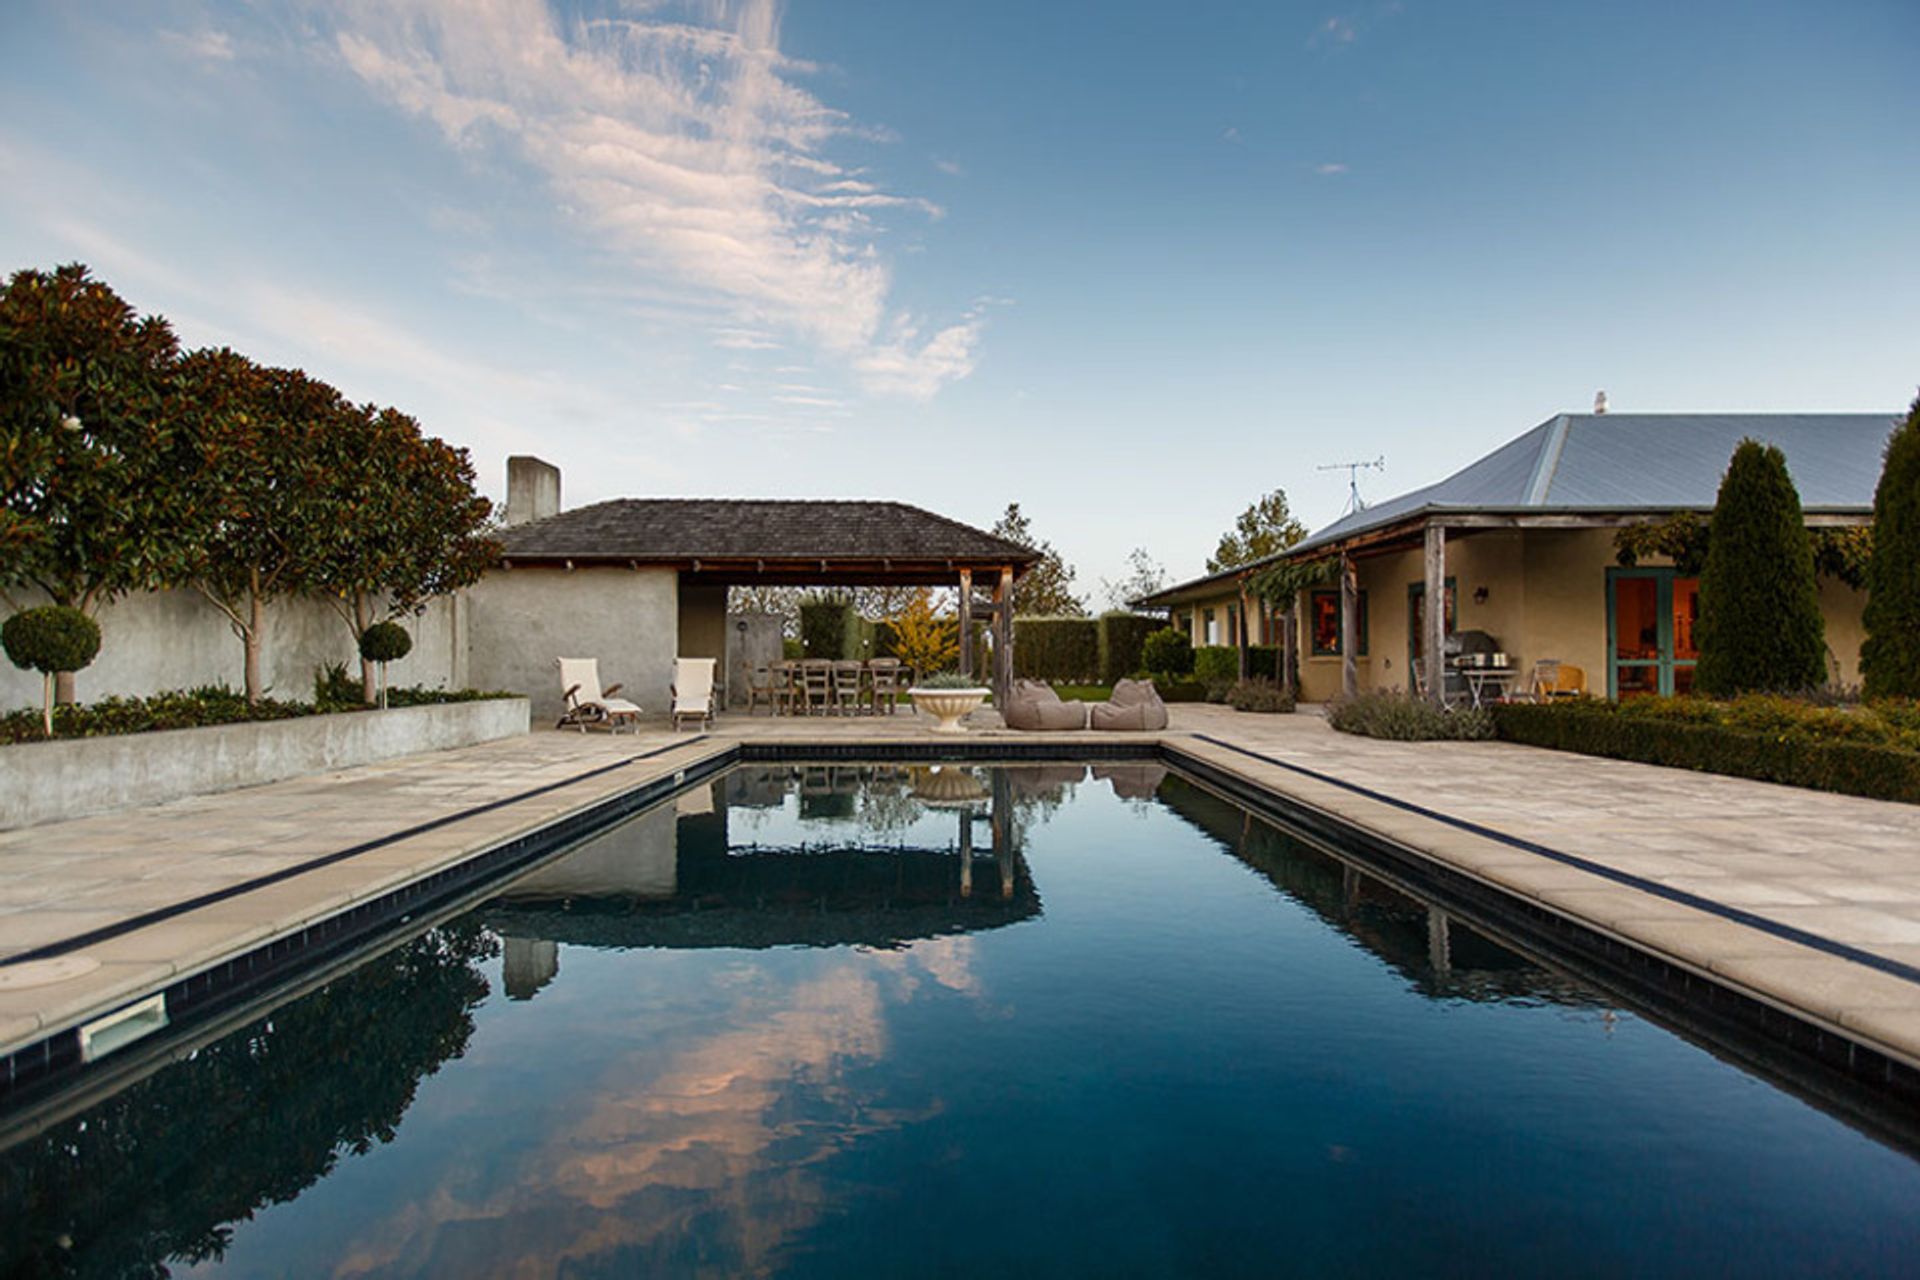 Aquanort's concrete pools are curated with raw materials sourced locally in New Zealand